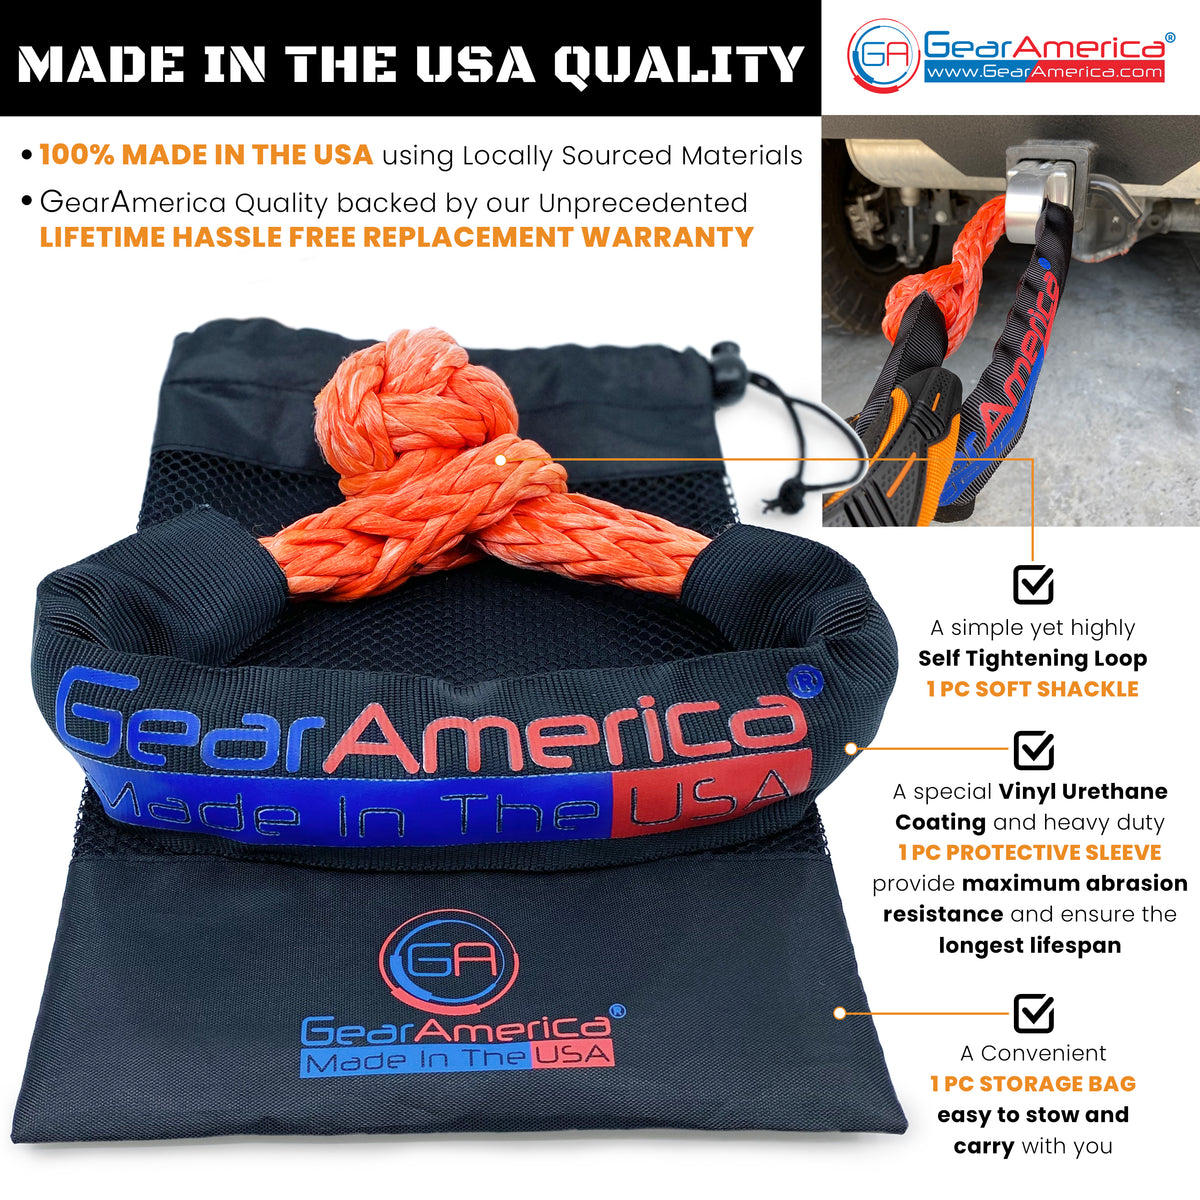 GearAmerica ½” Synthetic Soft Shackles (2PK) | 45,000 lbs Break Strength -  Made in The USA